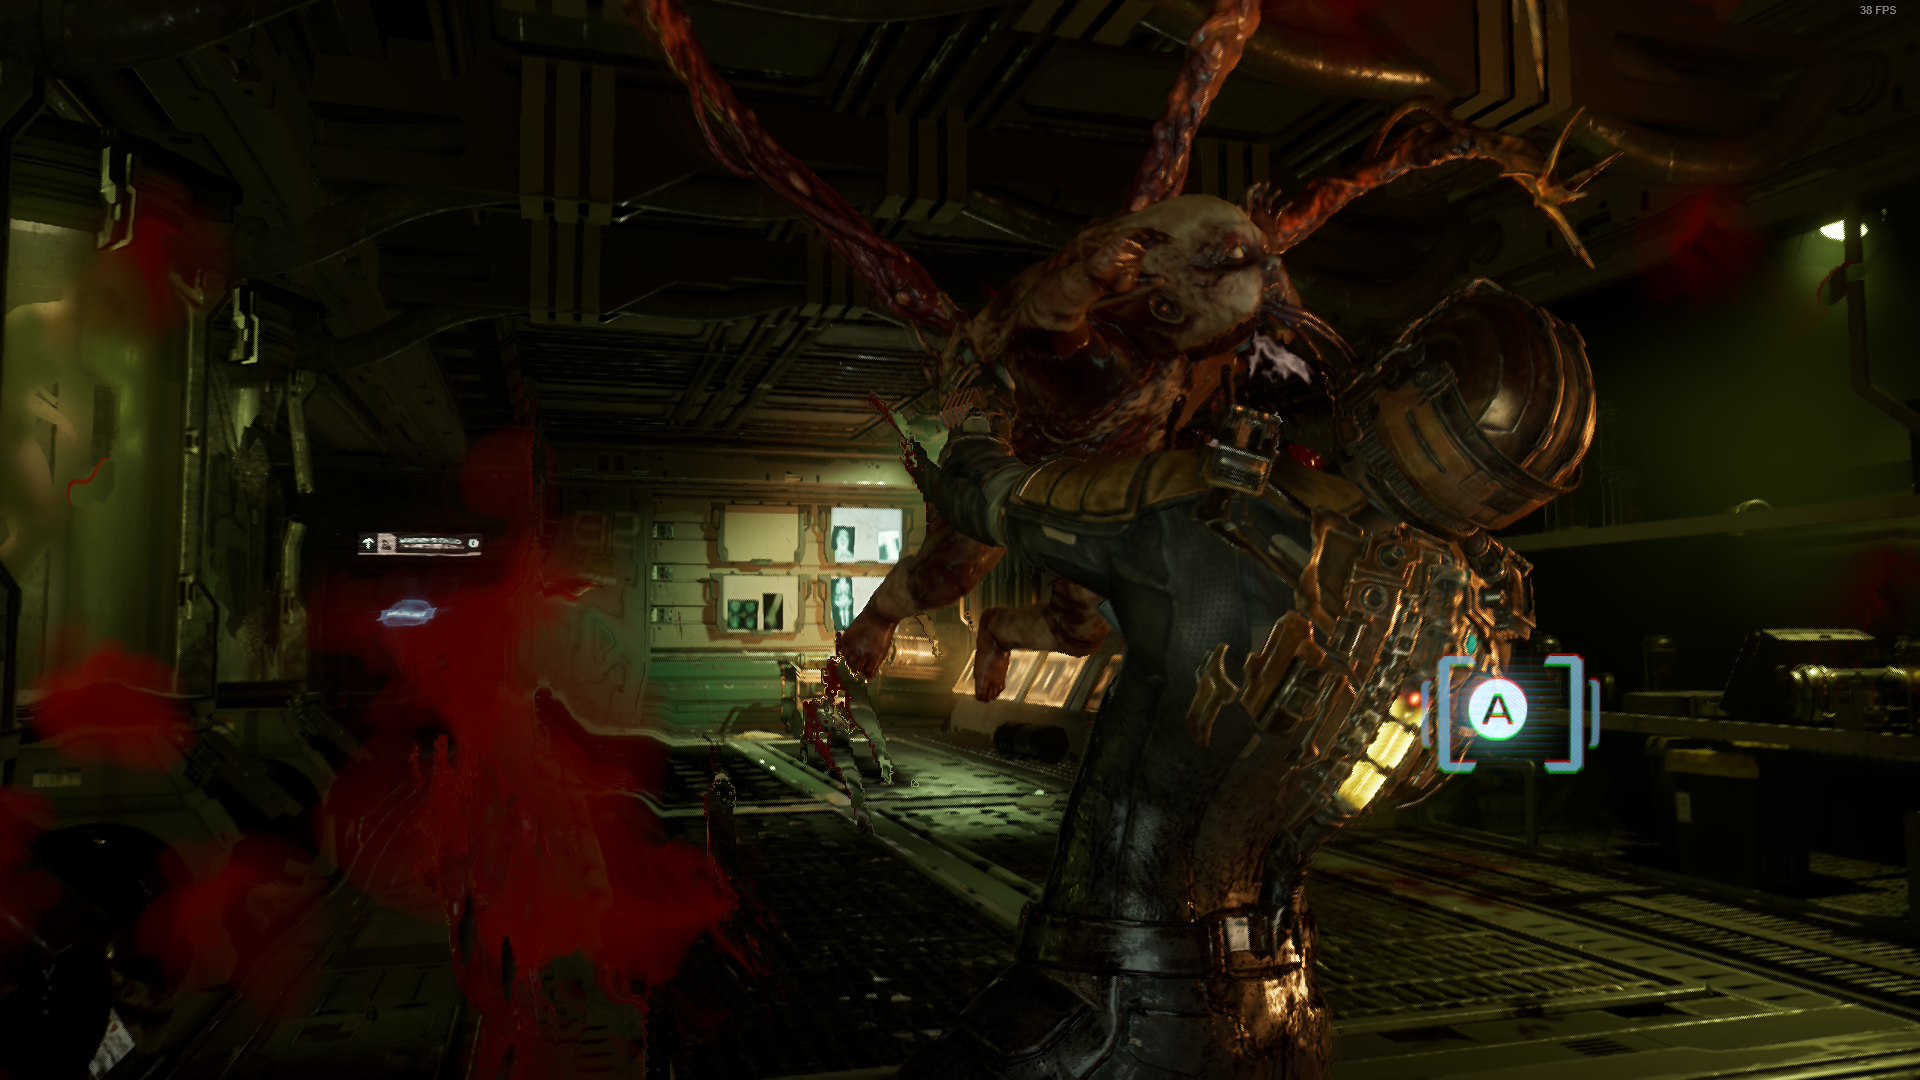 Dead Space review – stomping into the horror game history books